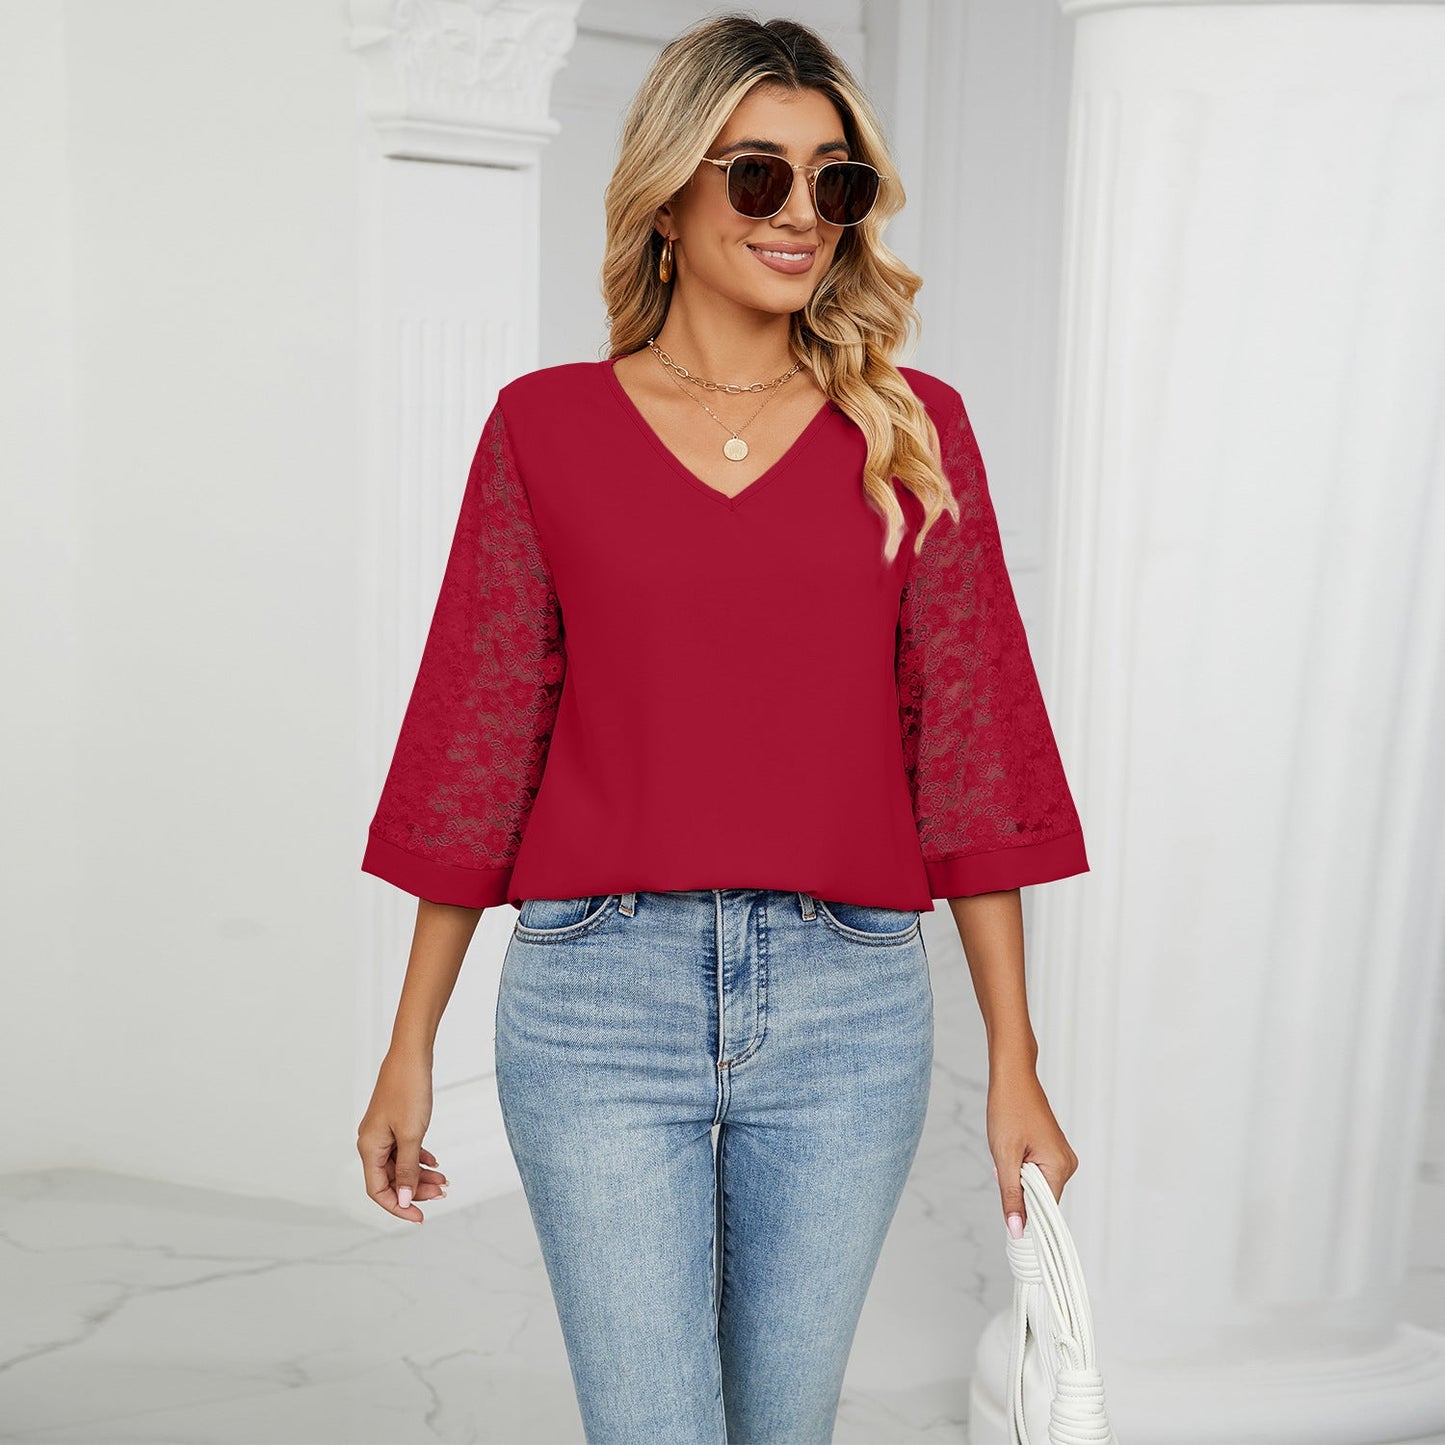 Fashion Summer Chiffon 3/4 Sleeves Women Blouses-Shirts & Tops-Red-S-Free Shipping Leatheretro